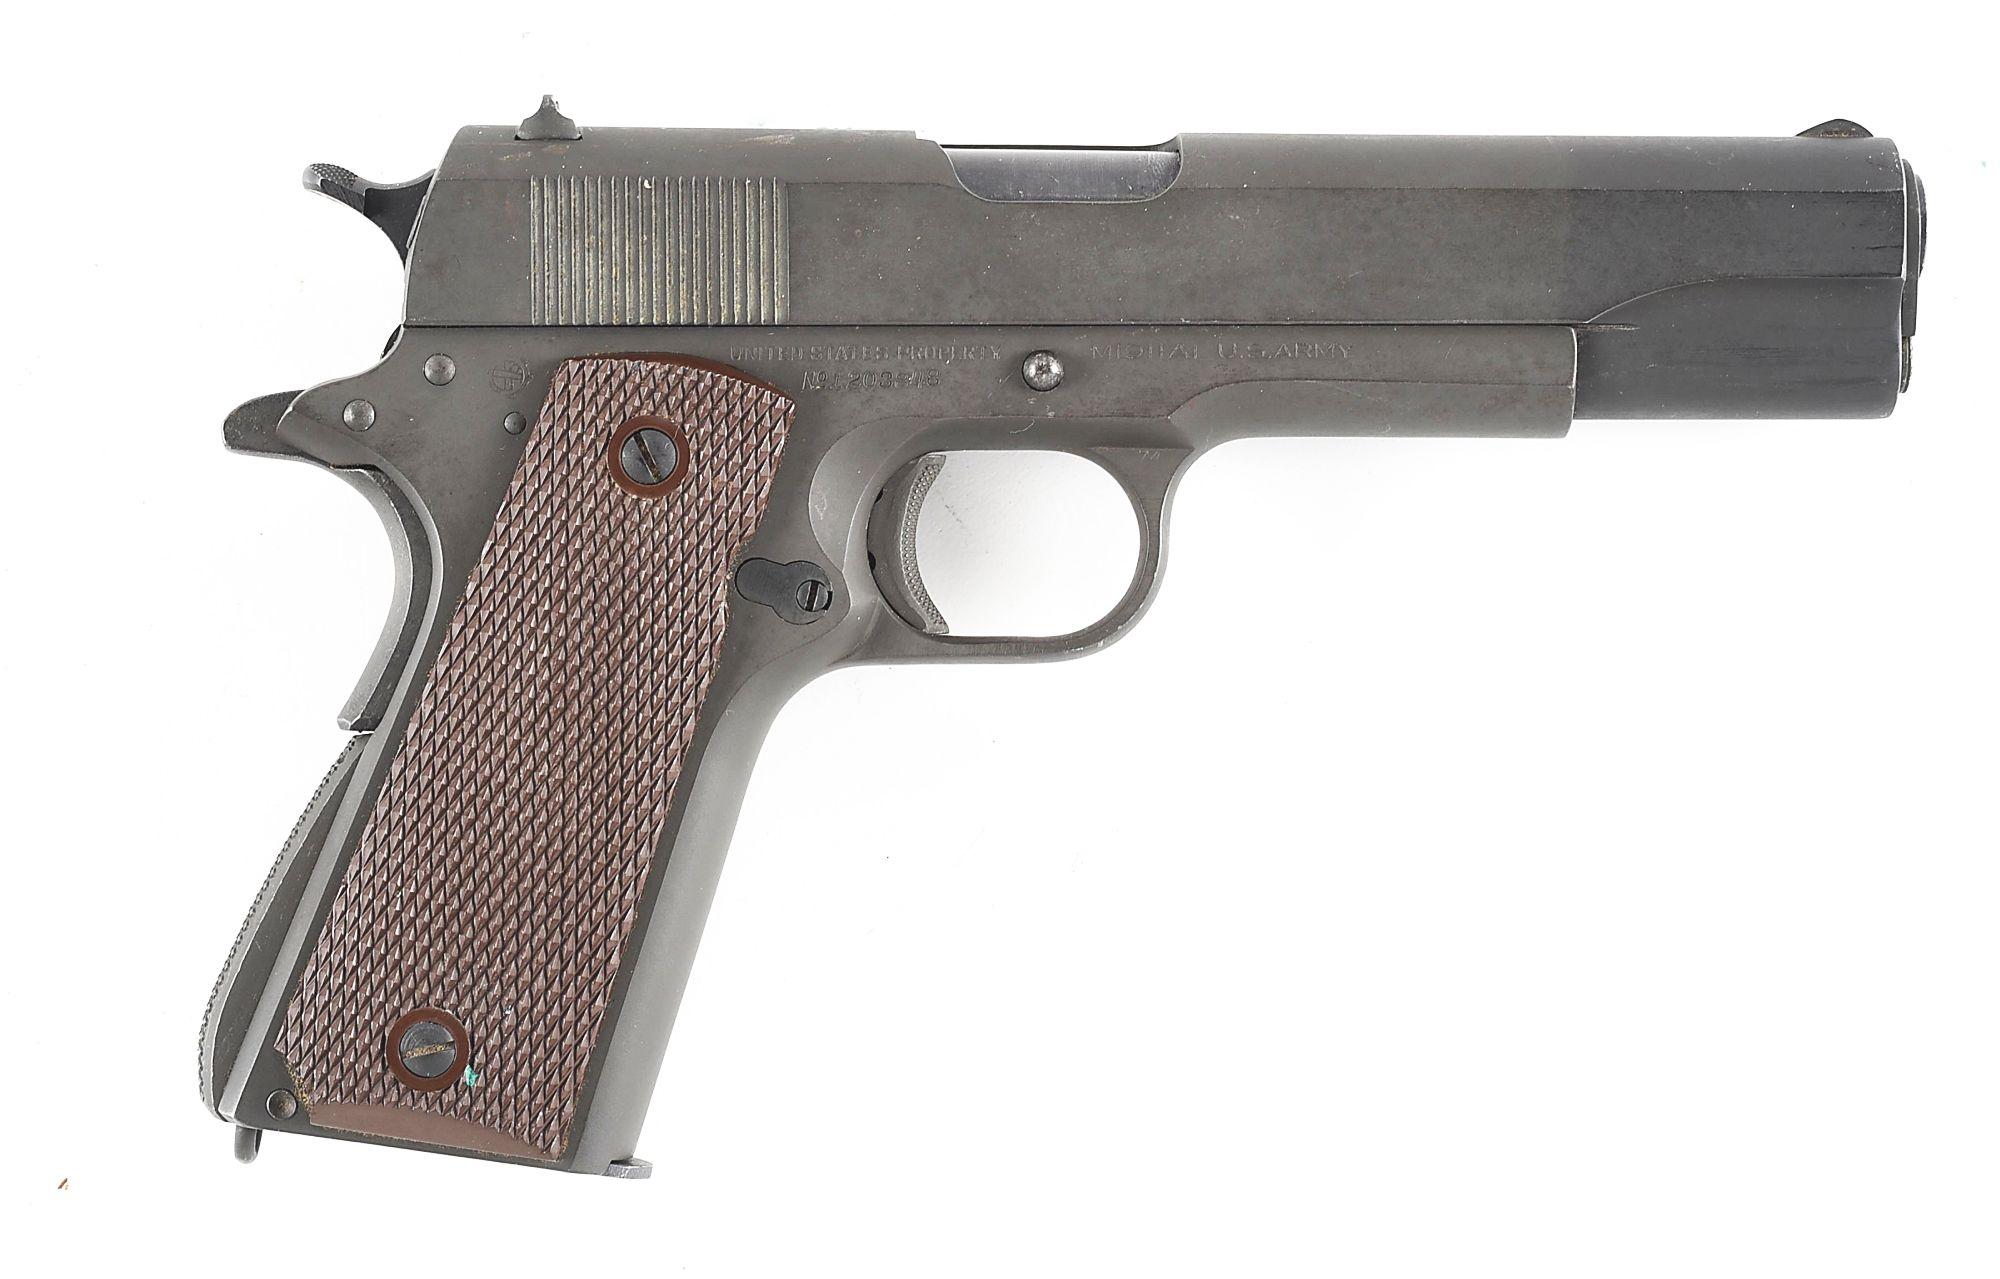 (C) COLT M1911A1 SEMI-AUTOMATIC PISTOL WITH 1943 DATED GRATON & KNIGHT CO. HOLSTER.